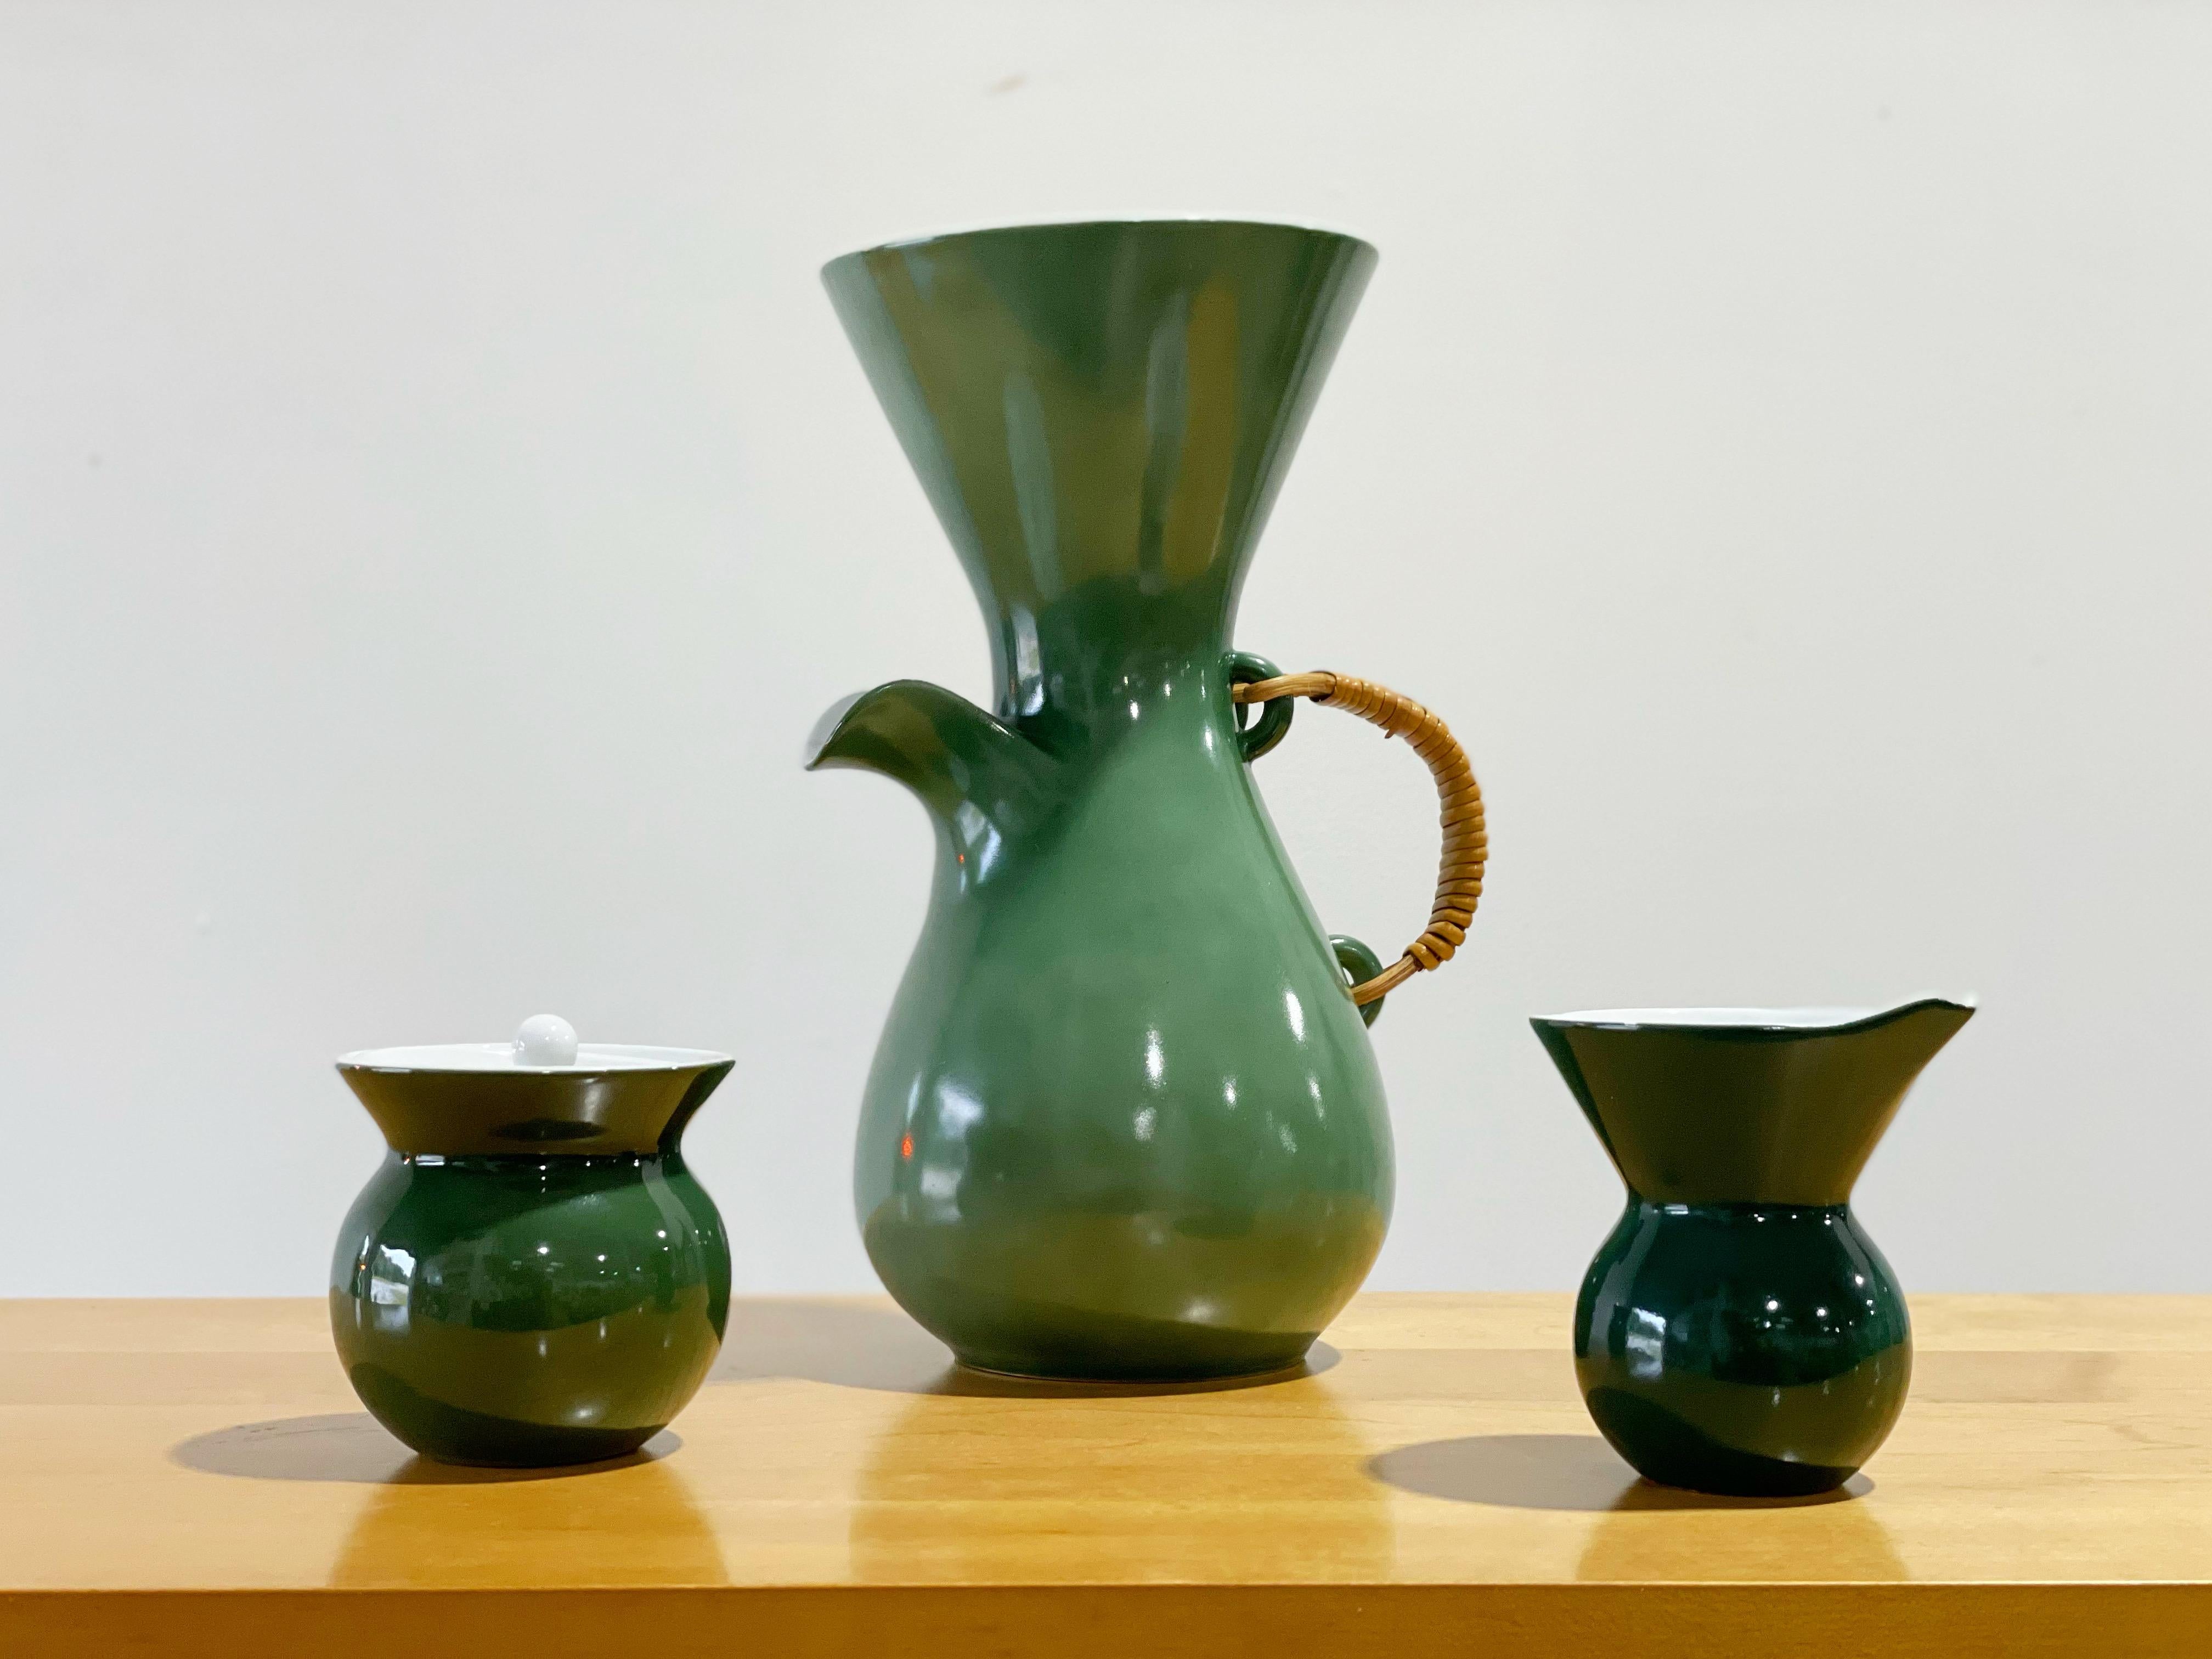 Exquisite modern coffee set designed by Kenji Fujita for Freeman Lederman. Coffee carafe, lidded sugar dish and creamer in rare green glaze with glossy white interior. Each piece is marked with the FL logo. The set is unique on the market currently.